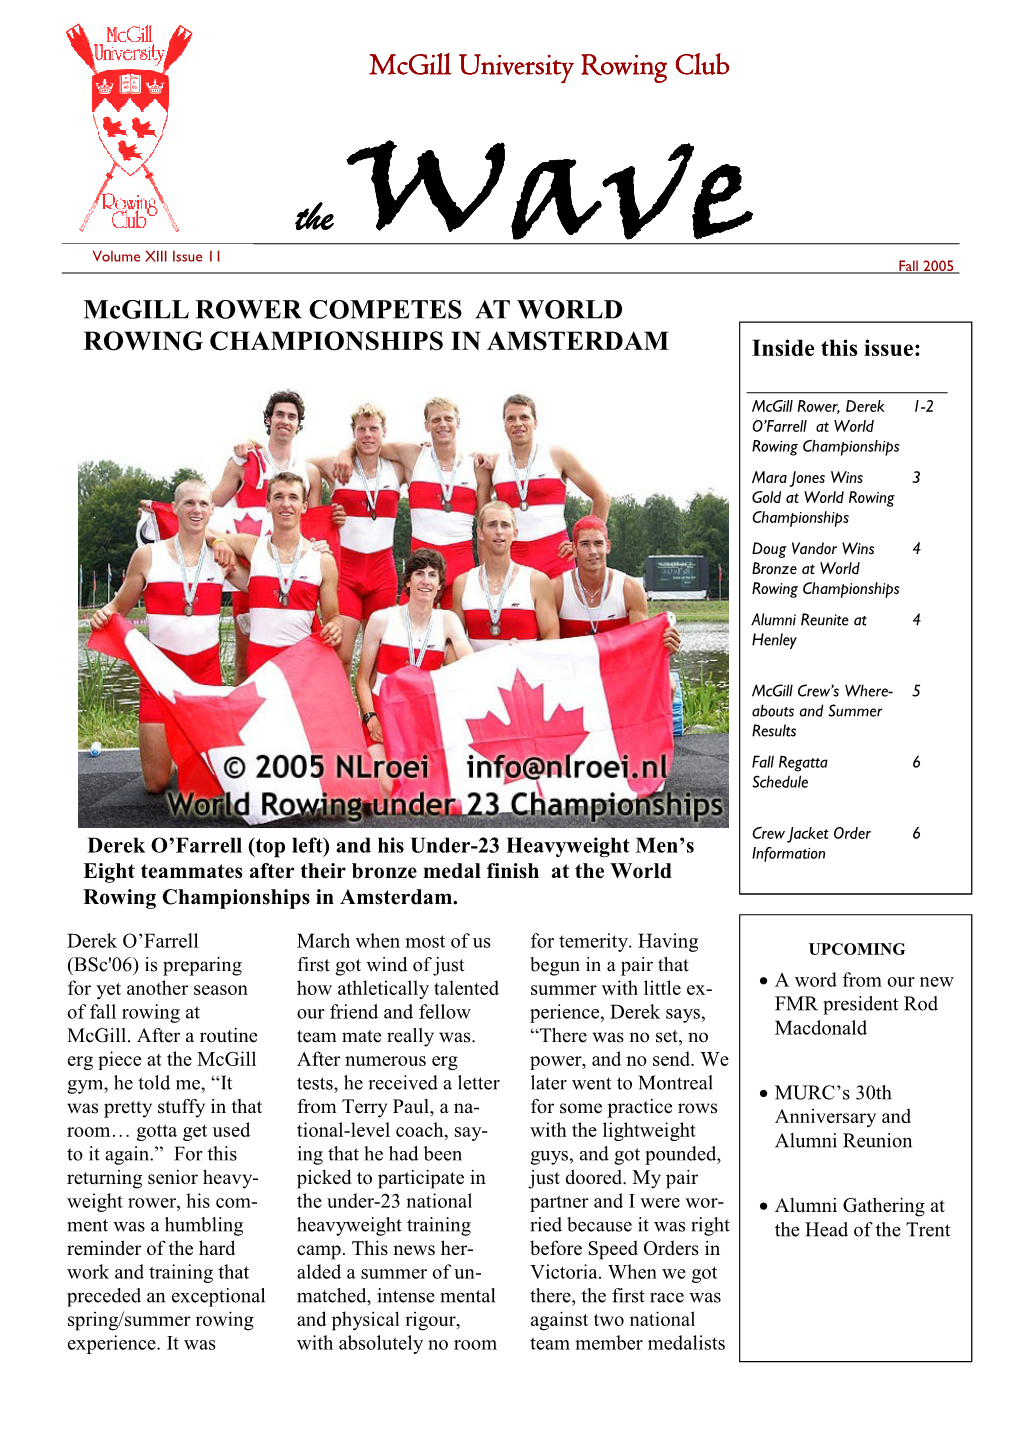 The Wave Volume XIII Issue 11 Fall 2005 Mcgill ROWER COMPETES at WORLD ROWING CHAMPIONSHIPS in AMSTERDAM Inside This Issue